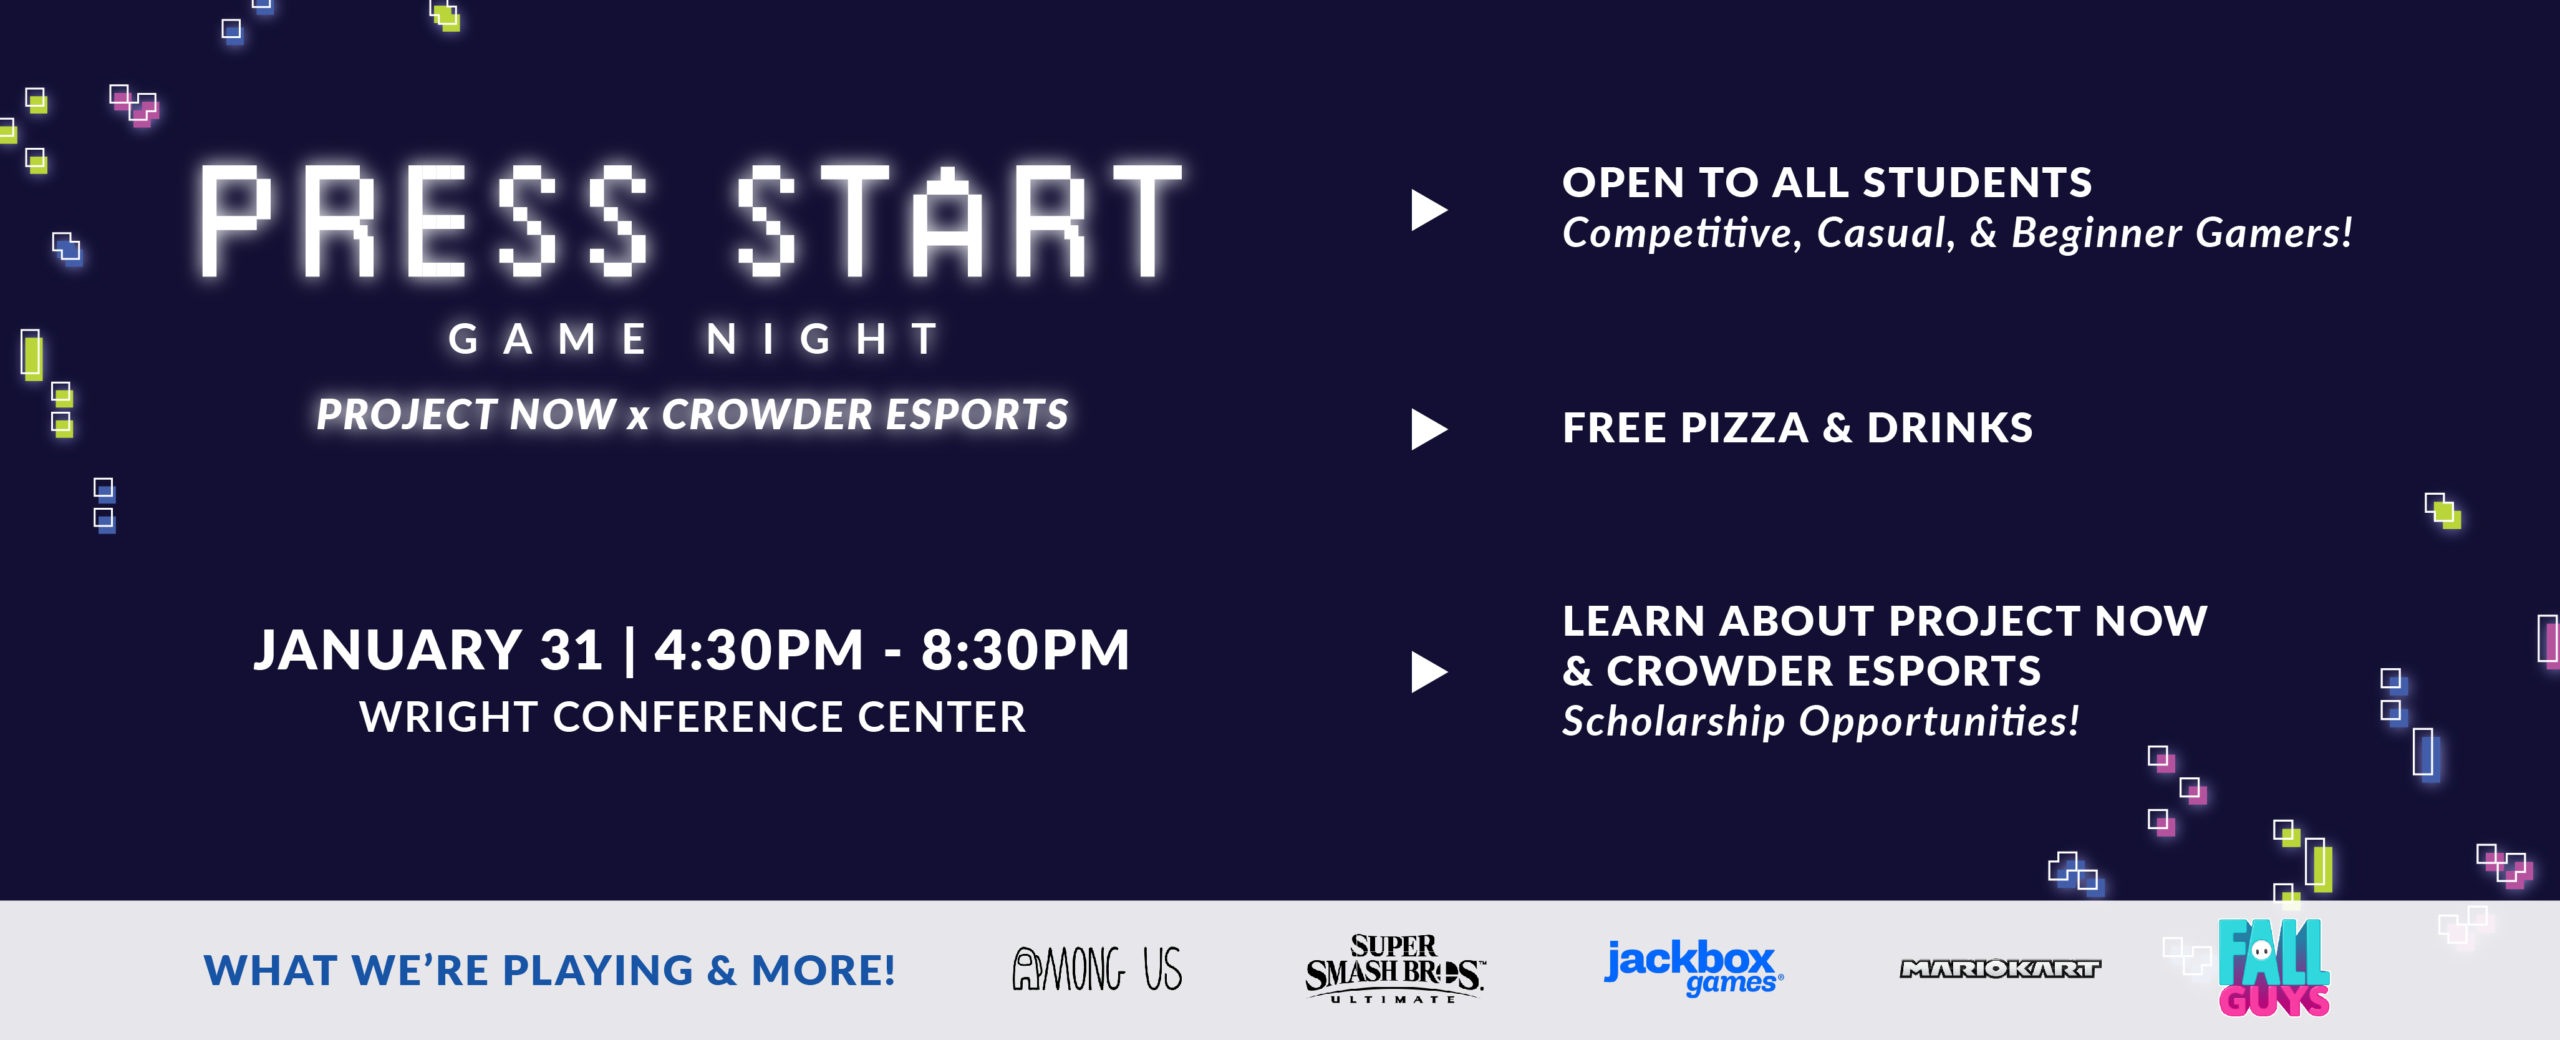 Press Start Game Night. January 31, 4:30pm Wright Conference Center. Open to all students. Free pizza. Learn more about Crowder eSports and Project Now